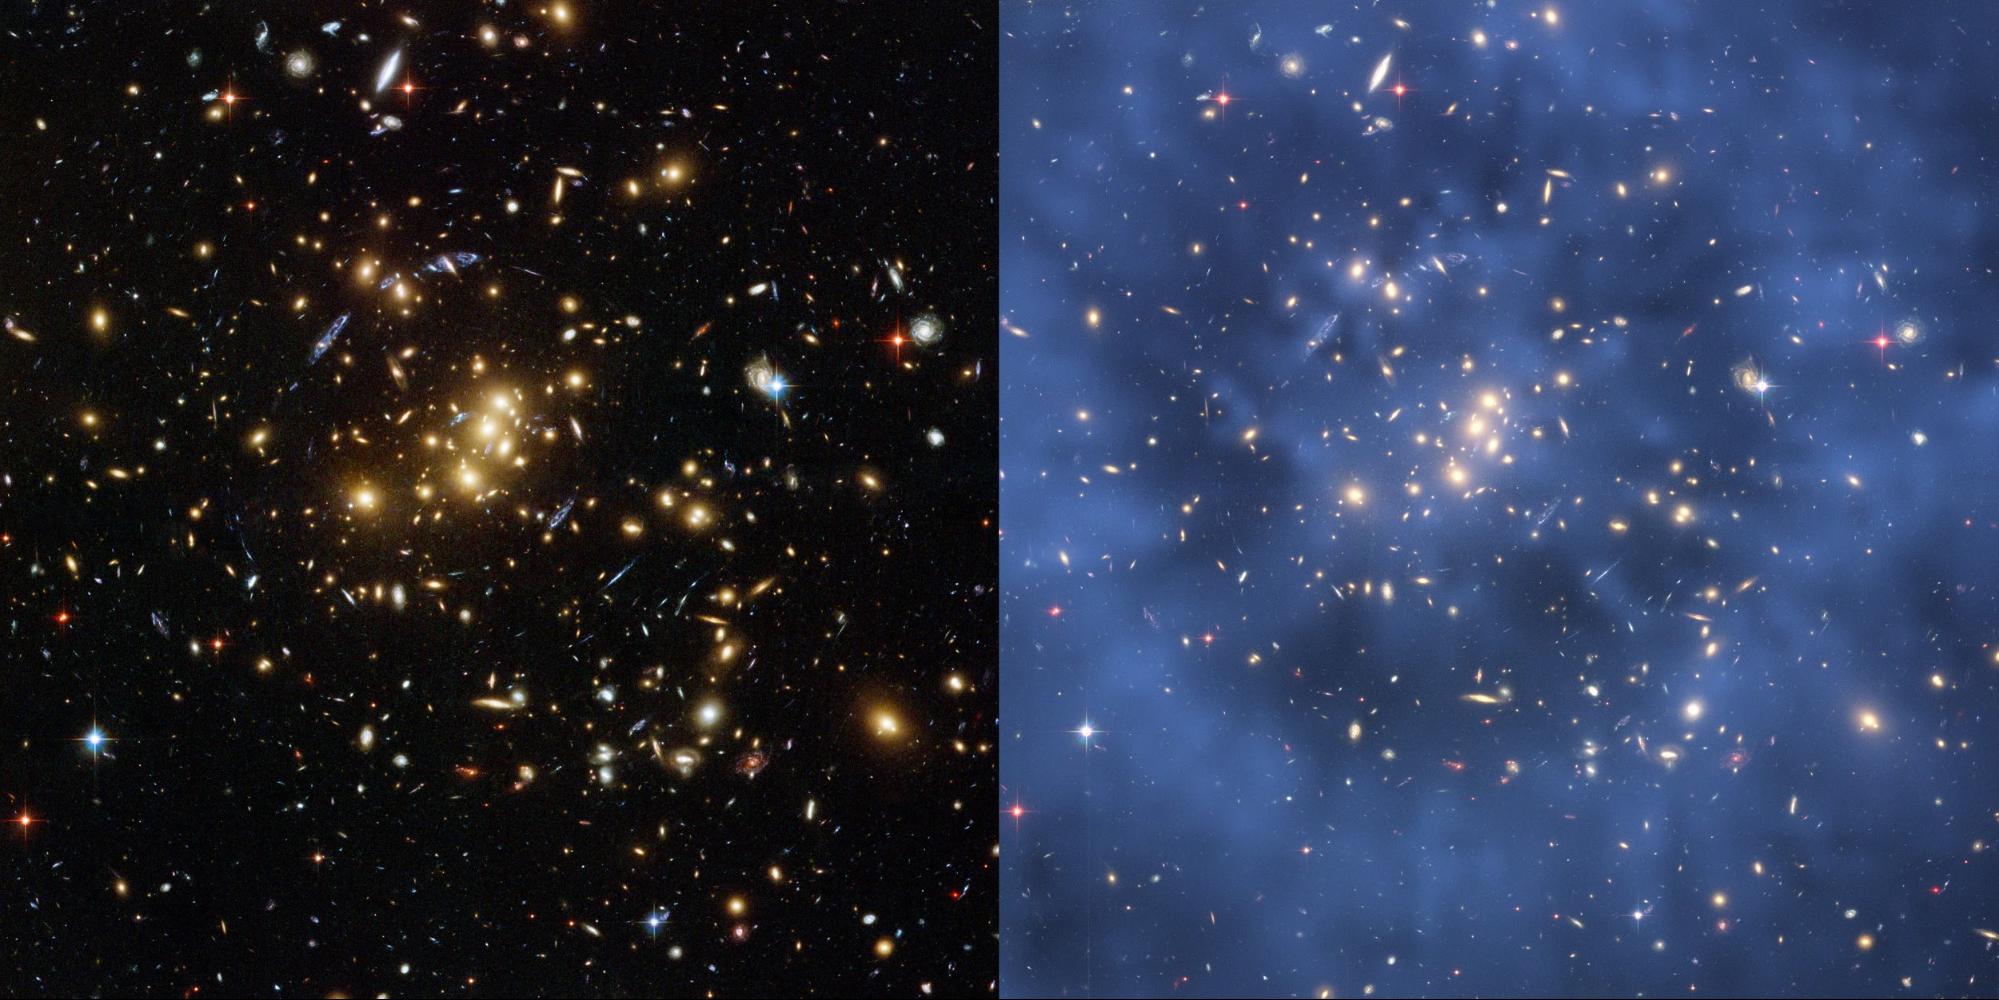 side-by-side images of galaxy cluster